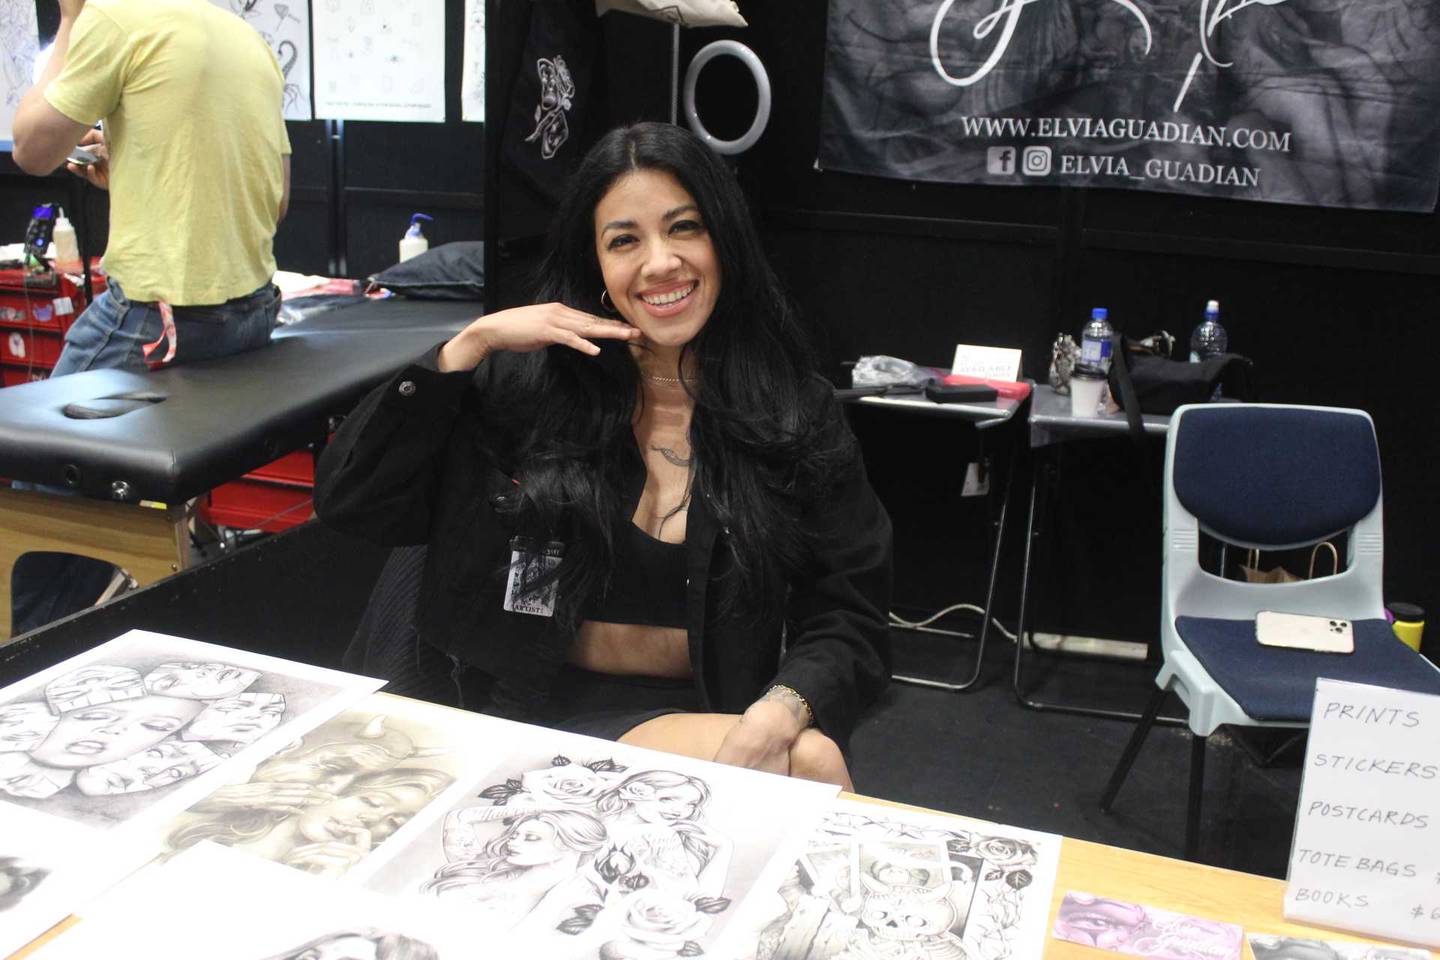 Elvia Guardian travelled from Mexico to tattoo at the 2023 New Zealand Tattoo and Art Festival. Photo / Alyssa Smith